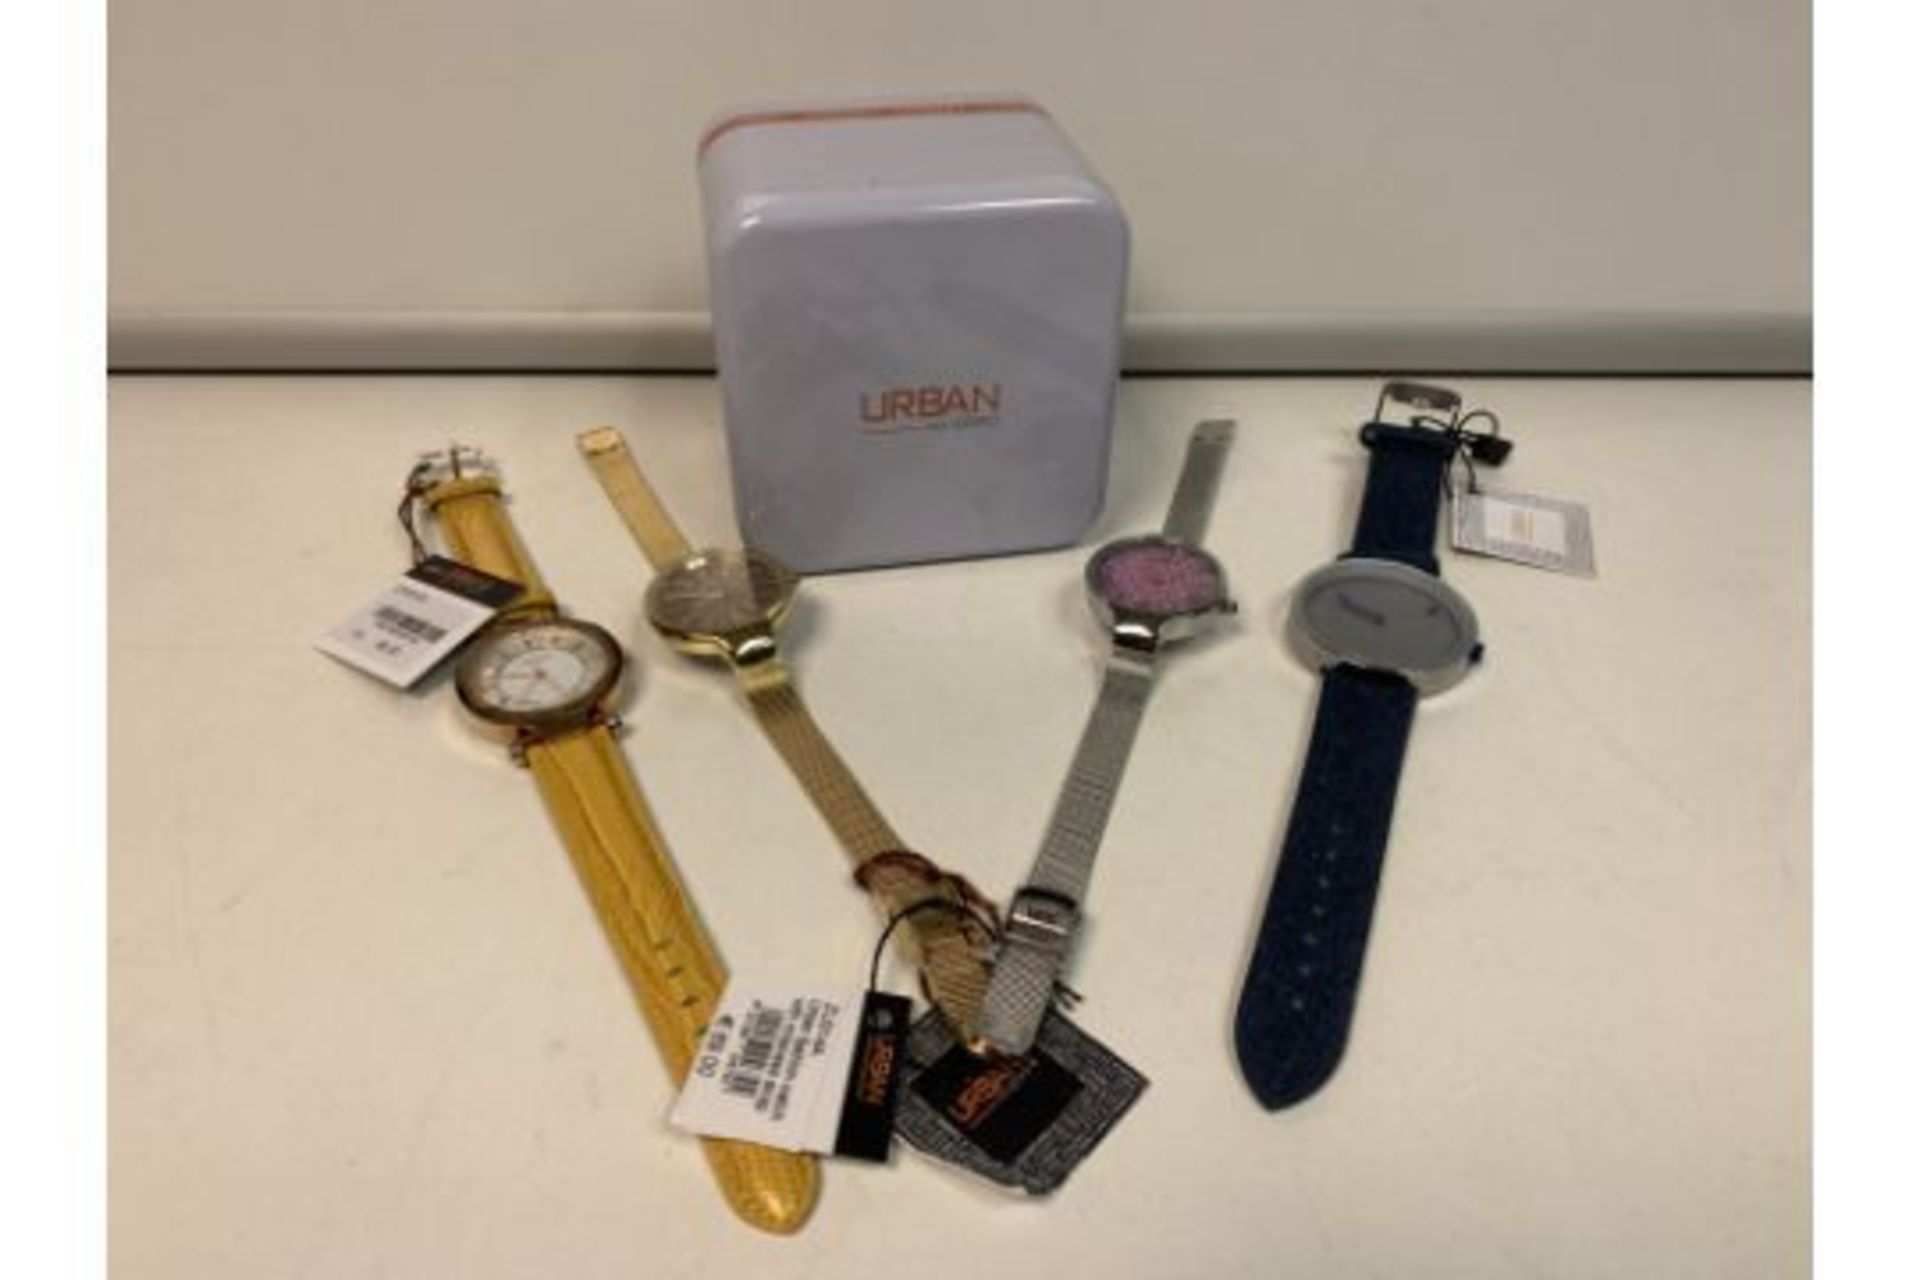 10 X BRAND NEW URBAN WATCHES ASSORTED RRP £40-70 EACH INSL